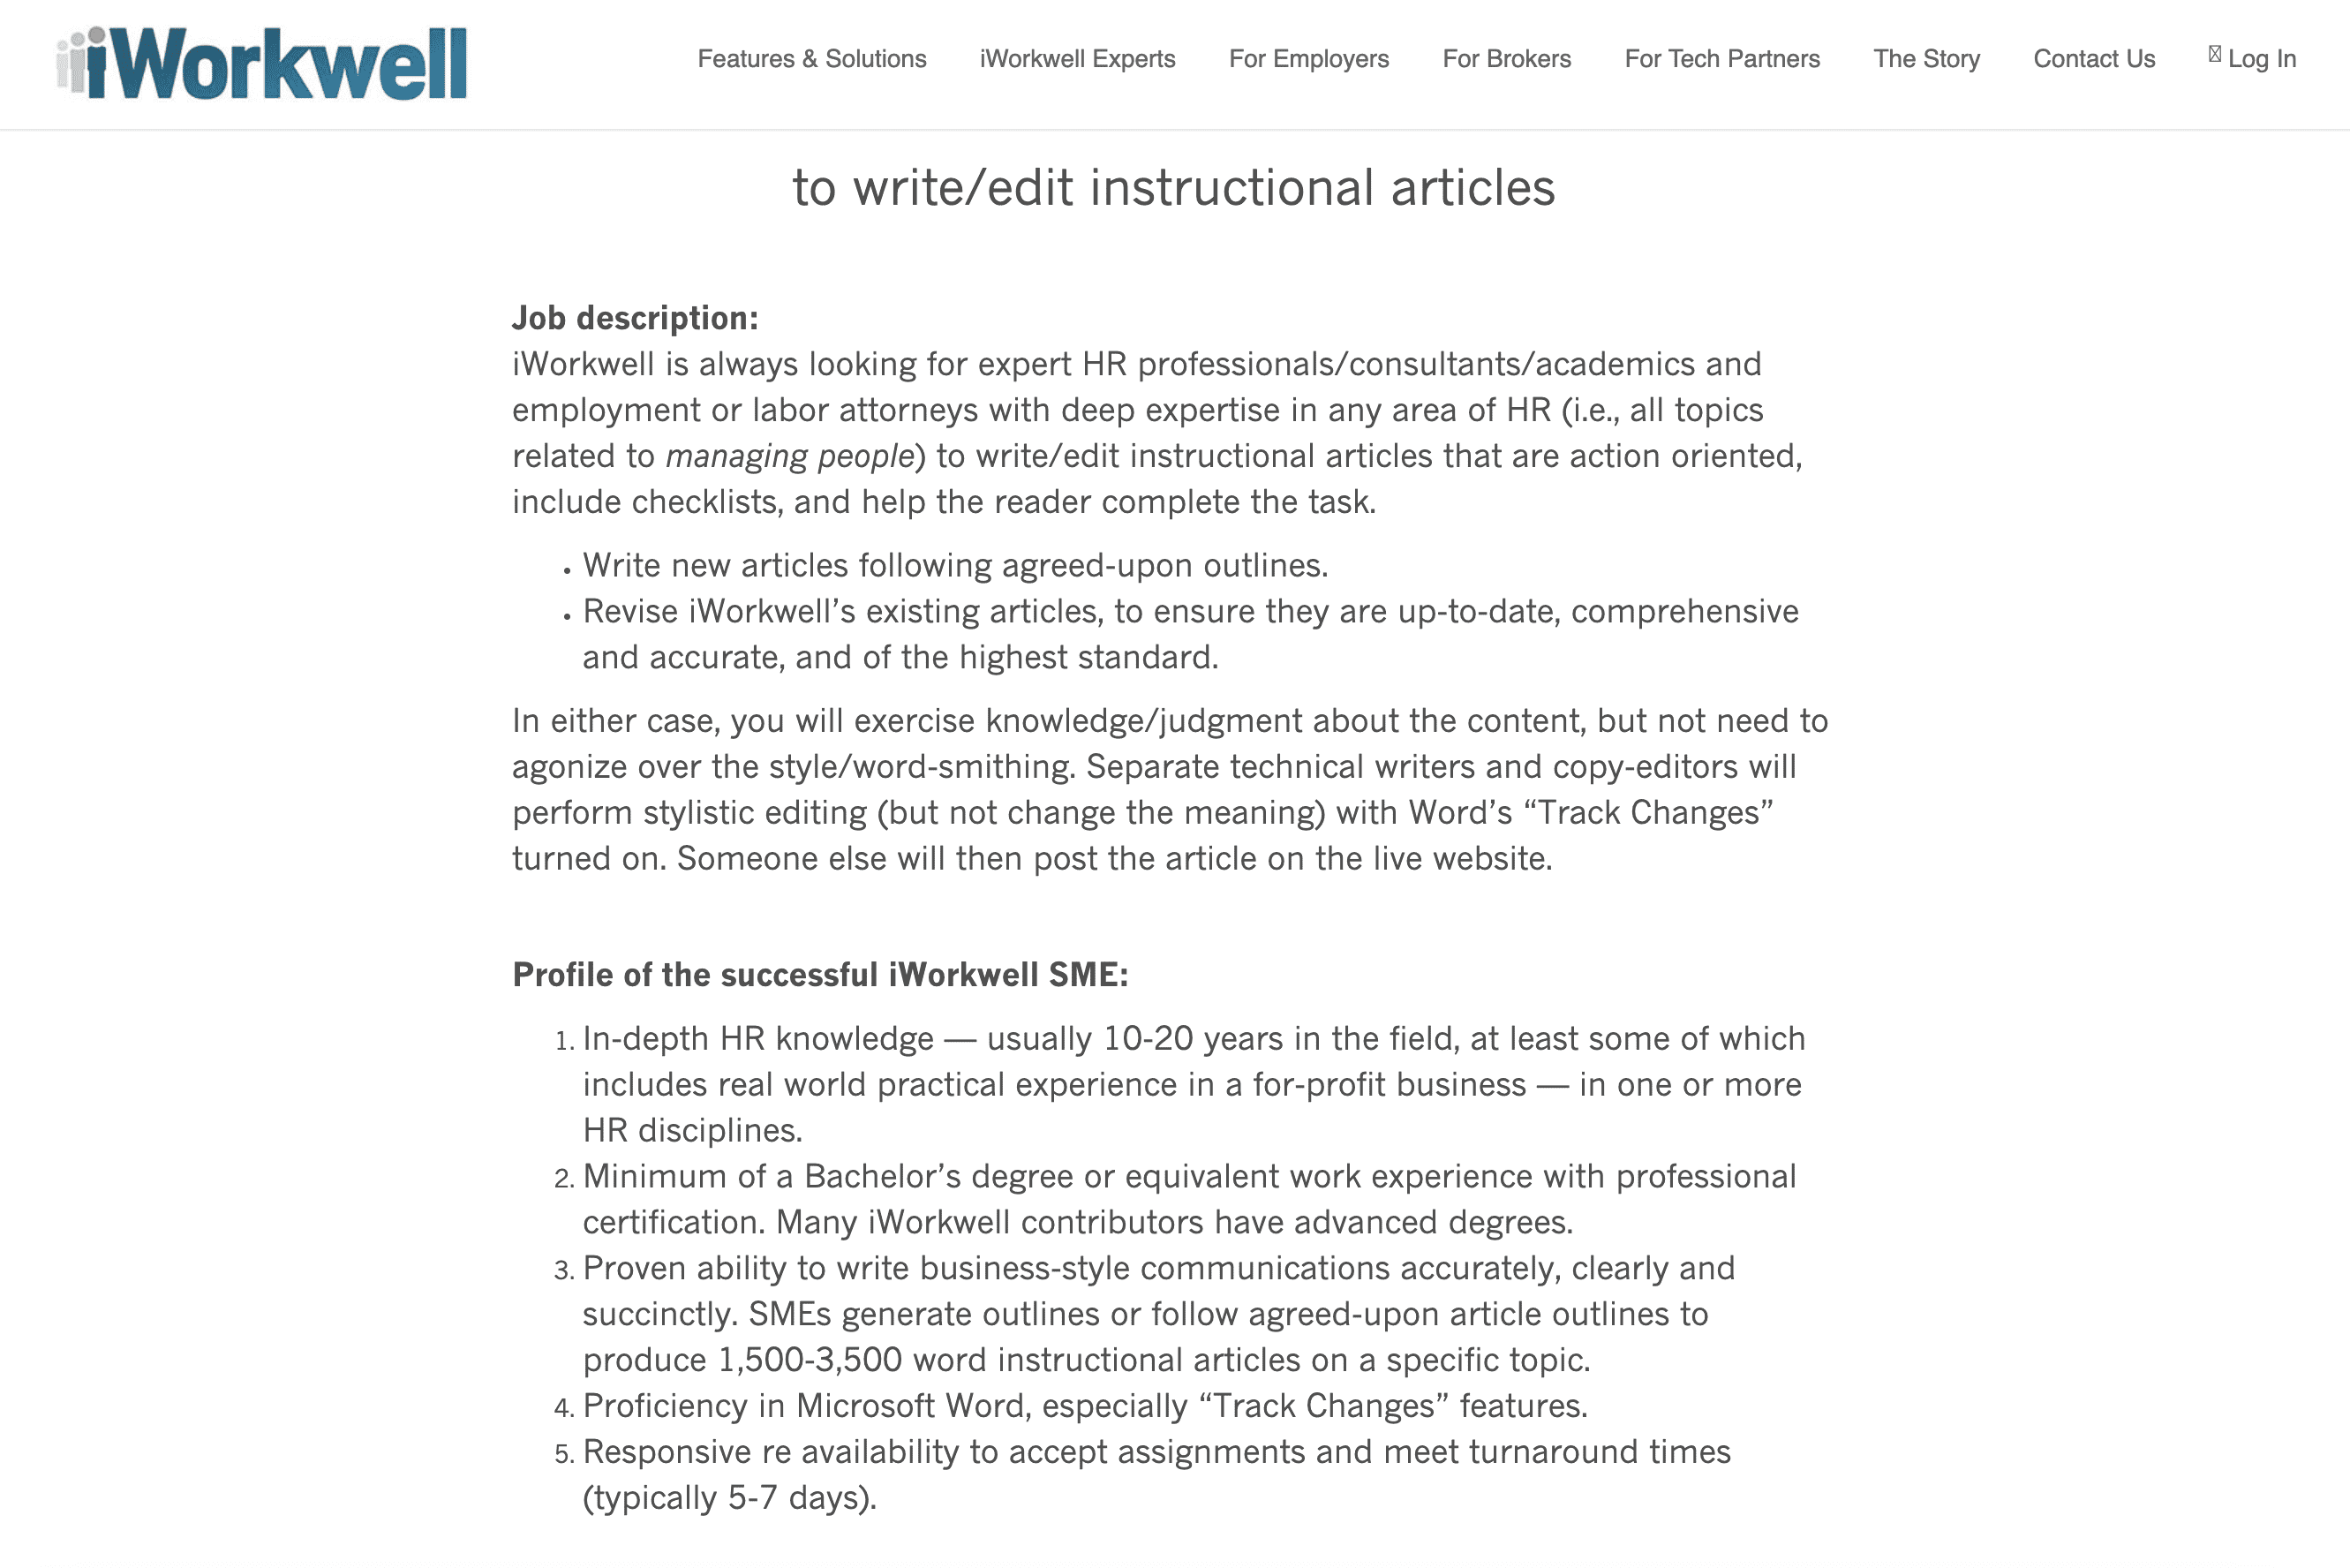 Get Paid To Write: A Screen Shot Of The Workwell Website, One Of The Best Sites To Get Paid For Writing Articles.